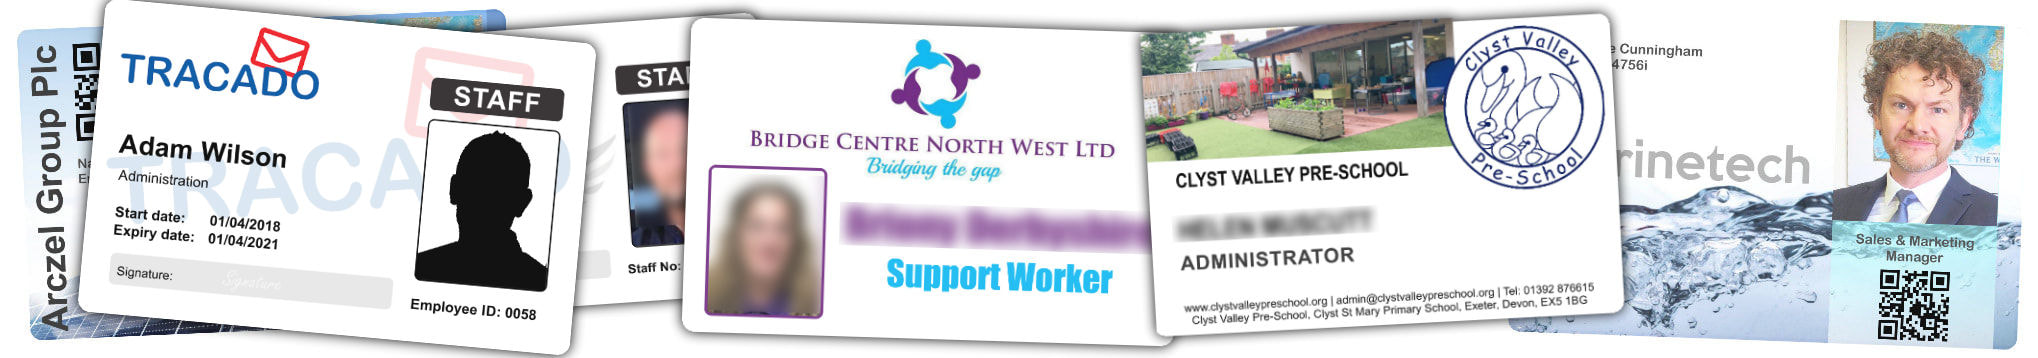 Walsall examples of staff photo ID cards | samples of employee Identity card printing | Workers ID cards printed in 